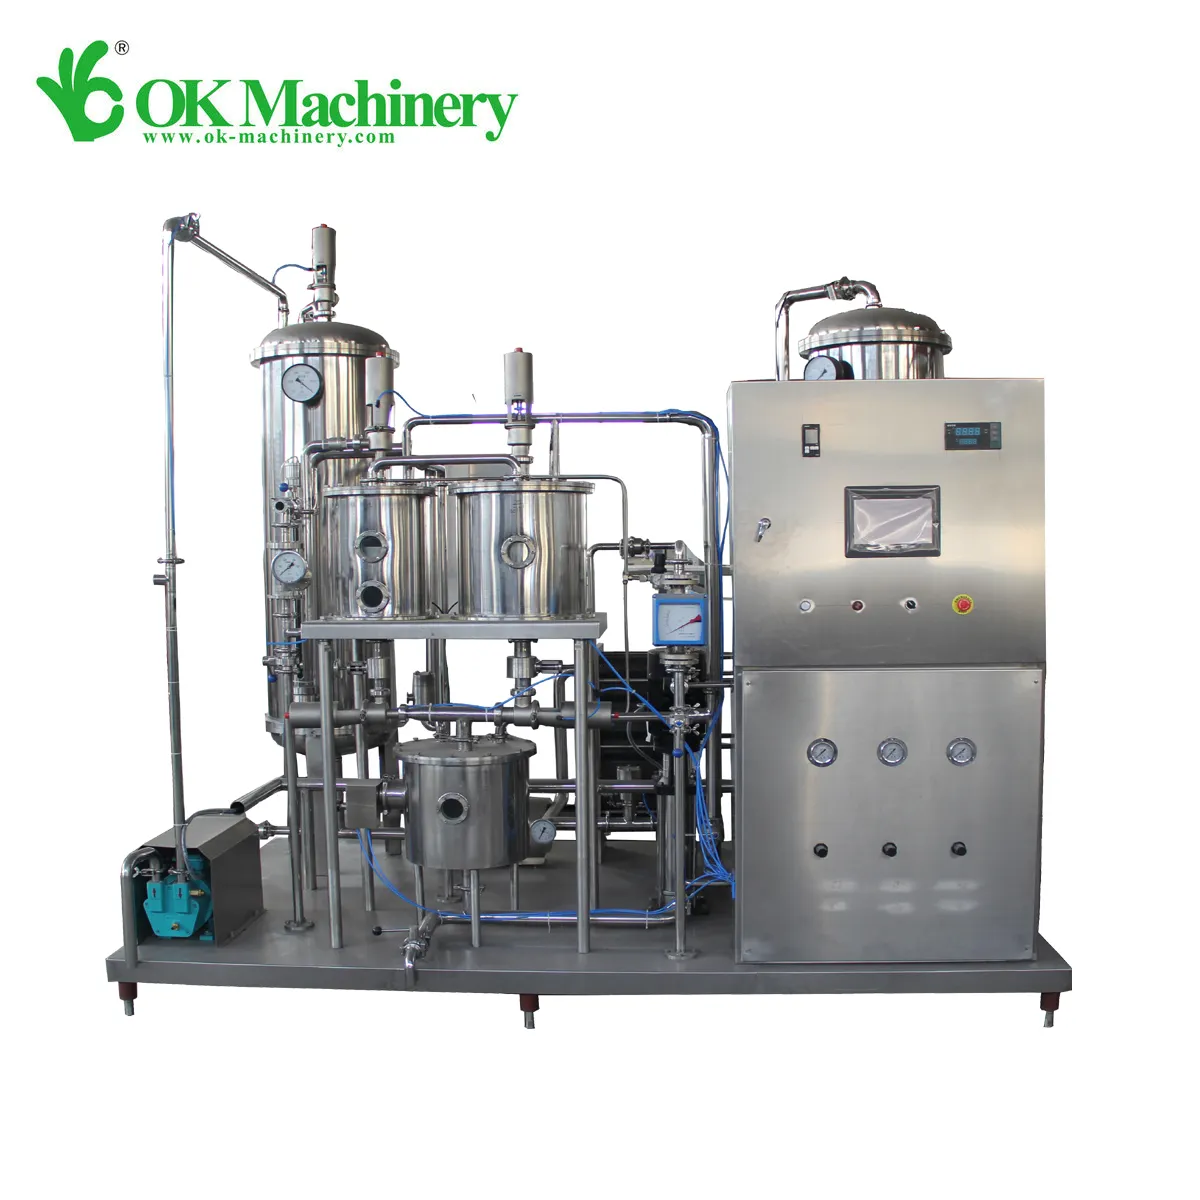 Automatic Beverage Mixer Equipment Co2 Mixer Carbonated Drink Mixer / Soft Drink Mixing Machine